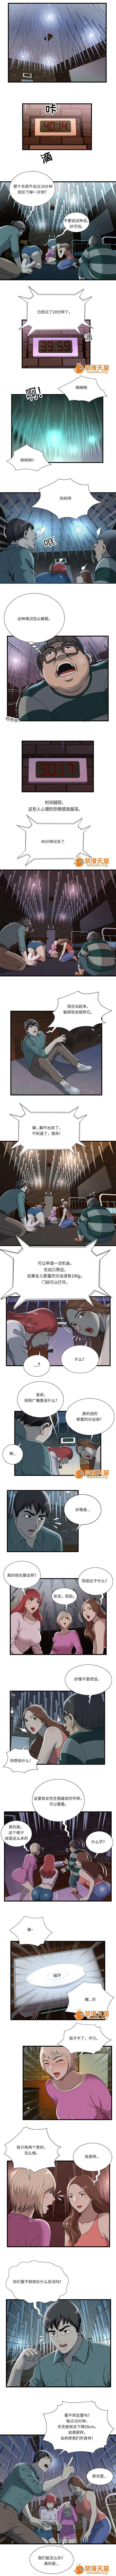 Blowjob 脫逃遊戲 1-37 Work - Page 7